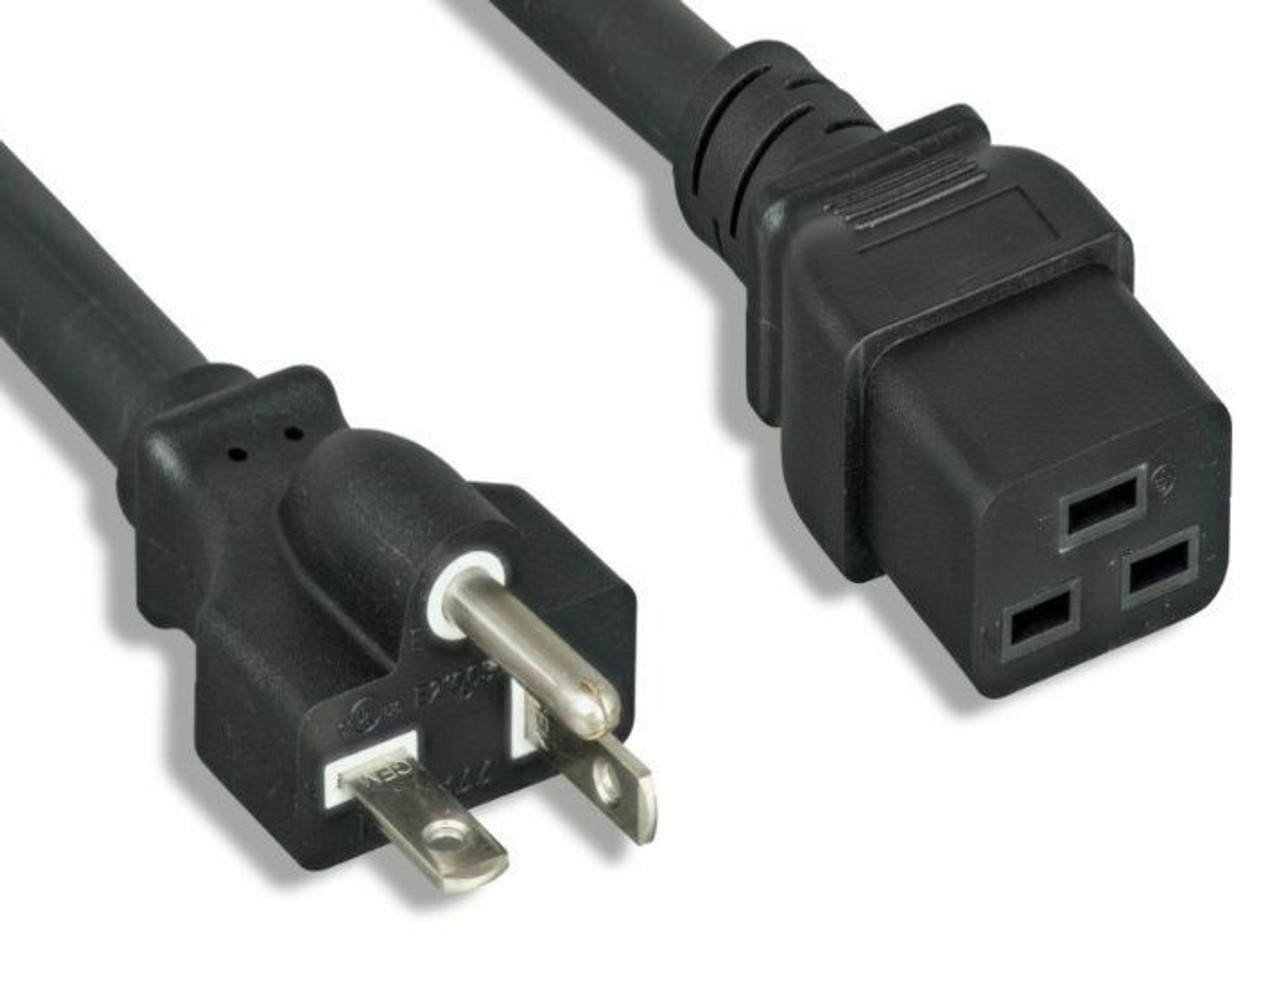 5-20P to C19 Power Cords